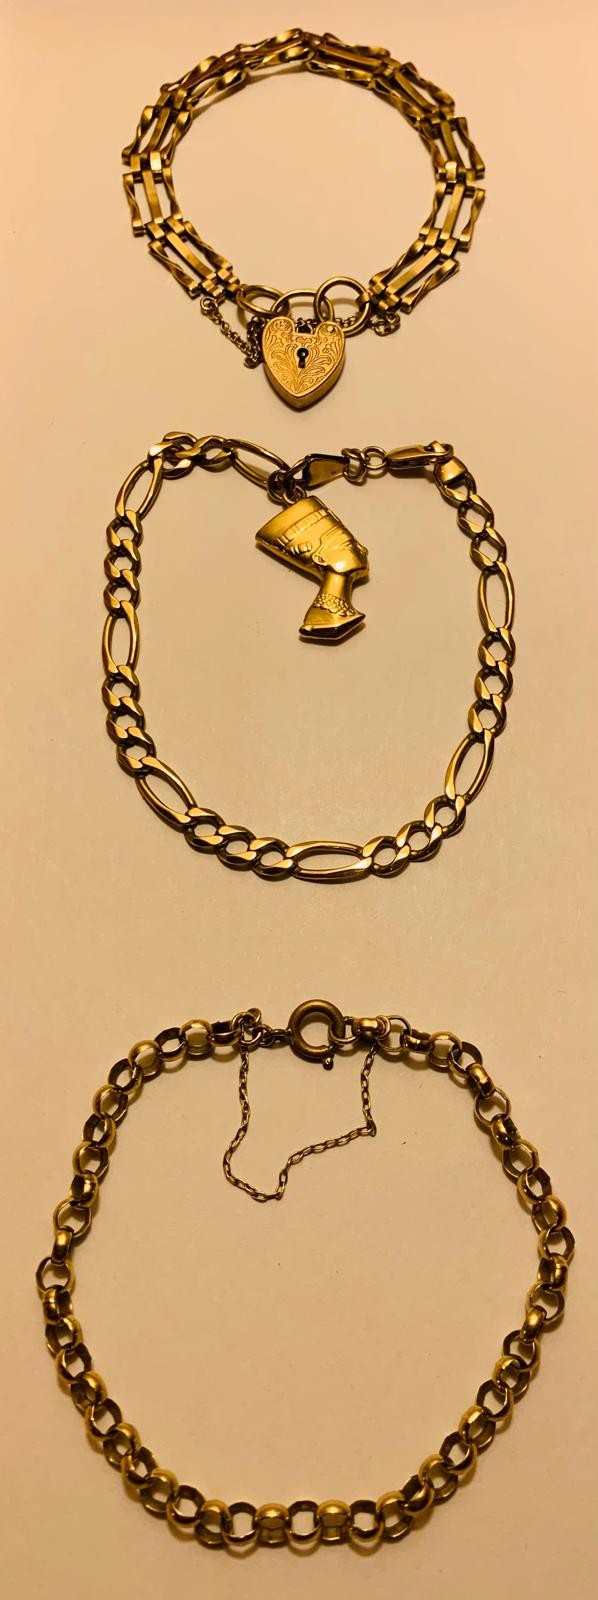 9ct GOLD BRACELET WITH UNMARKED PHARAOH CHARM, WEIGHT APPROX 12.85g, 9ct GOLD GATE CHARM BRACELET